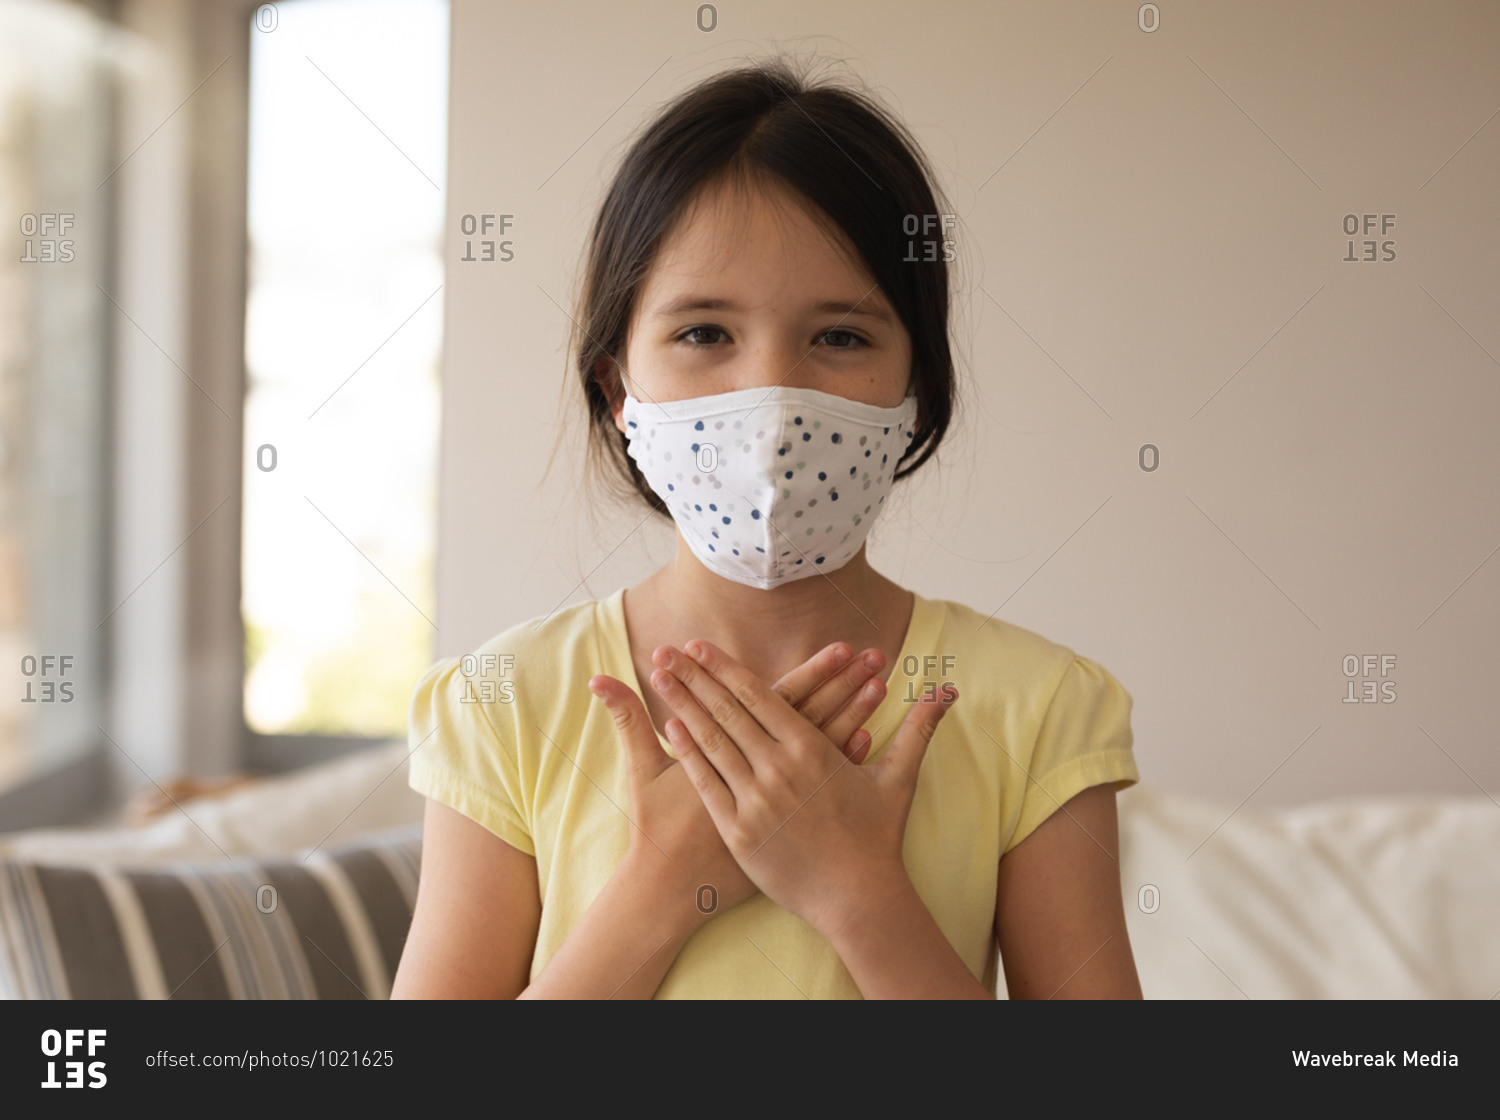 Portrait of Caucasian girl spending time at home, wearing face mask, looking at camera, using sign language. Social distancing during Covid 19 Coronavirus quarantine lockdown.